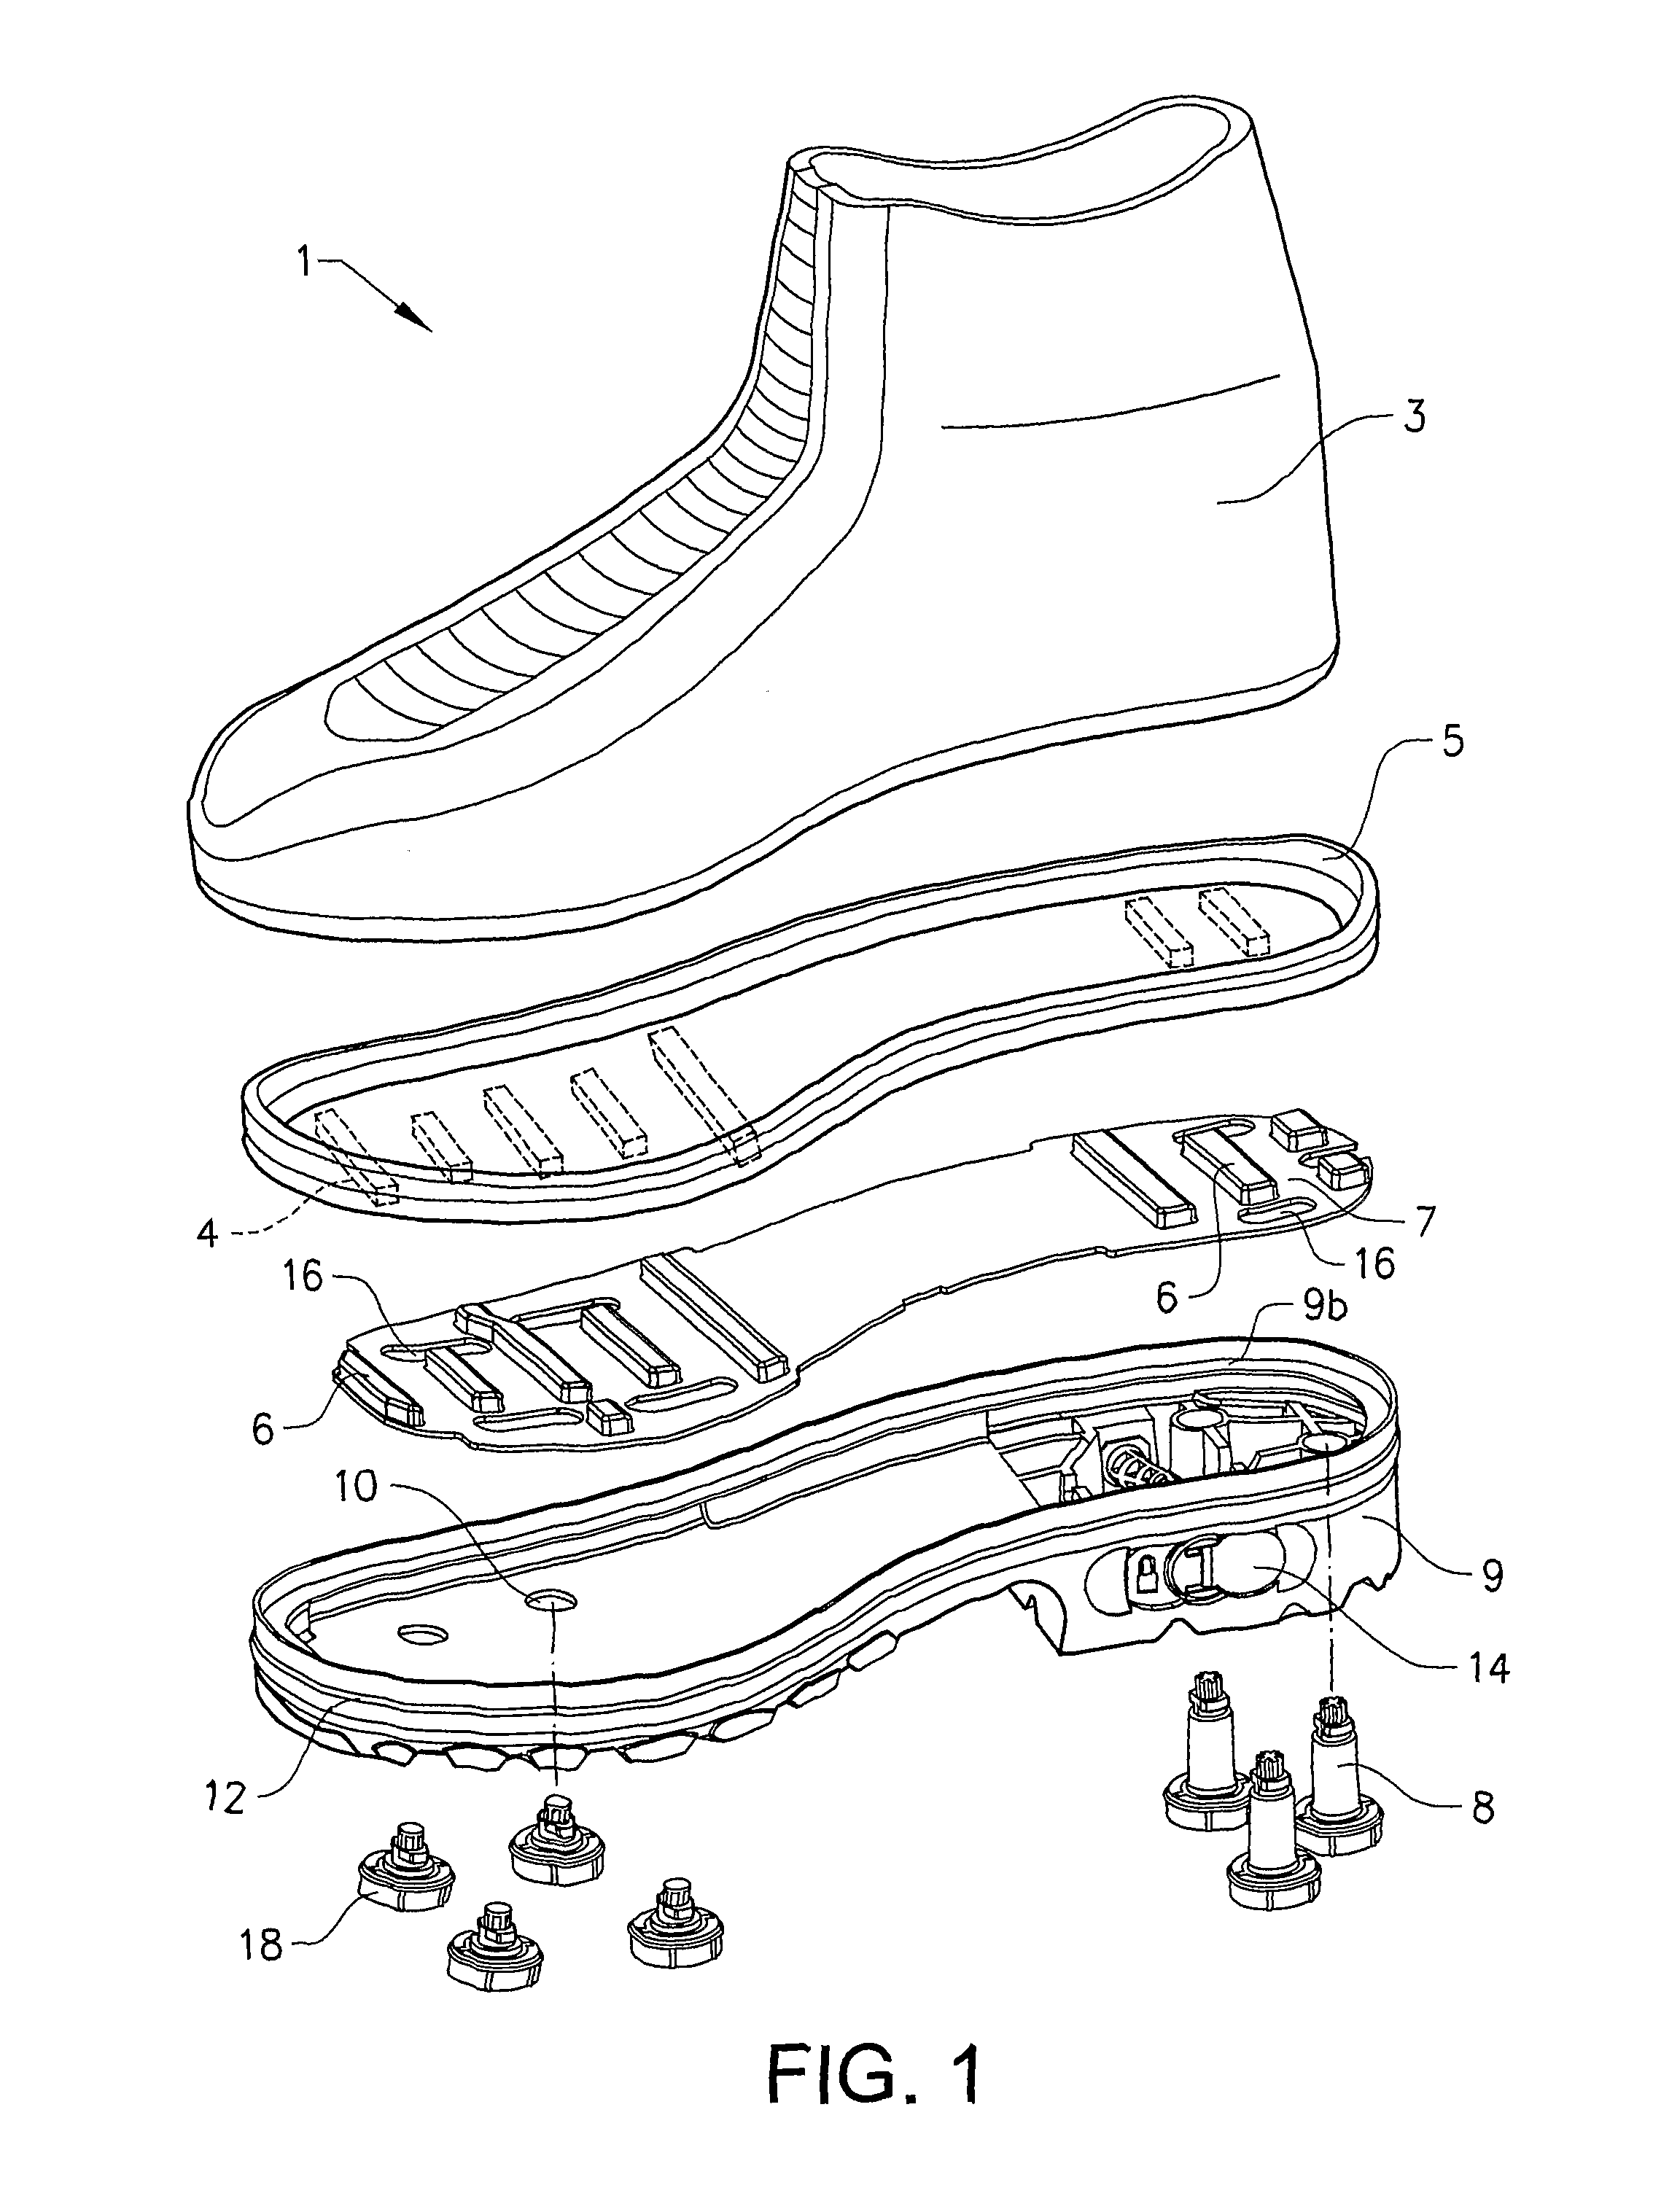 Spike device for an anti-slid shoe